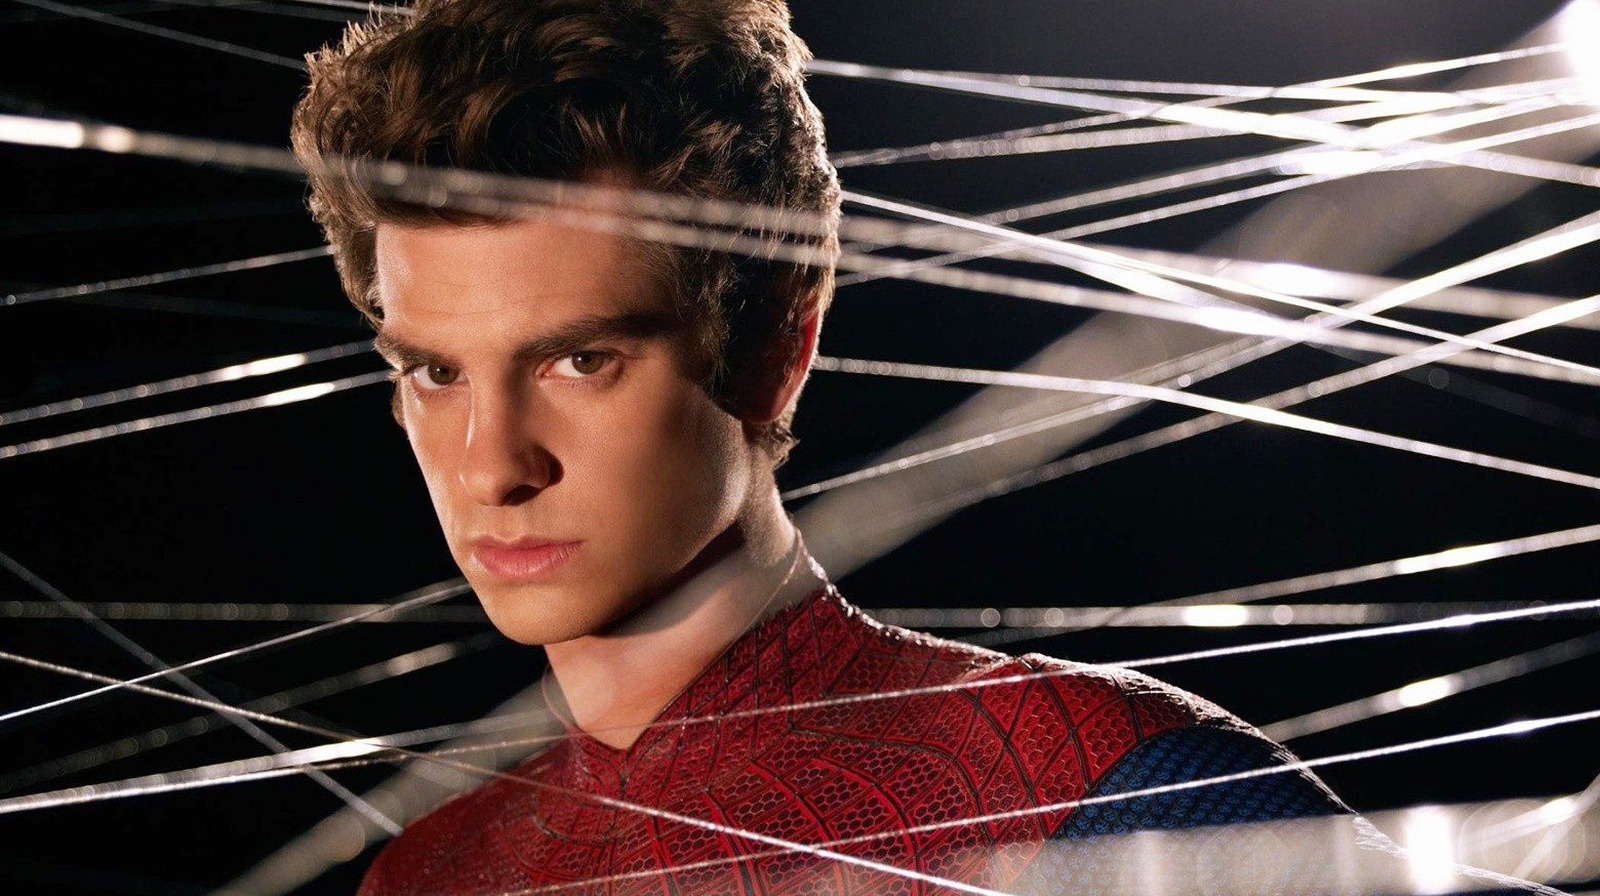 What If The Amazing Spider-Man 3 Happened? 